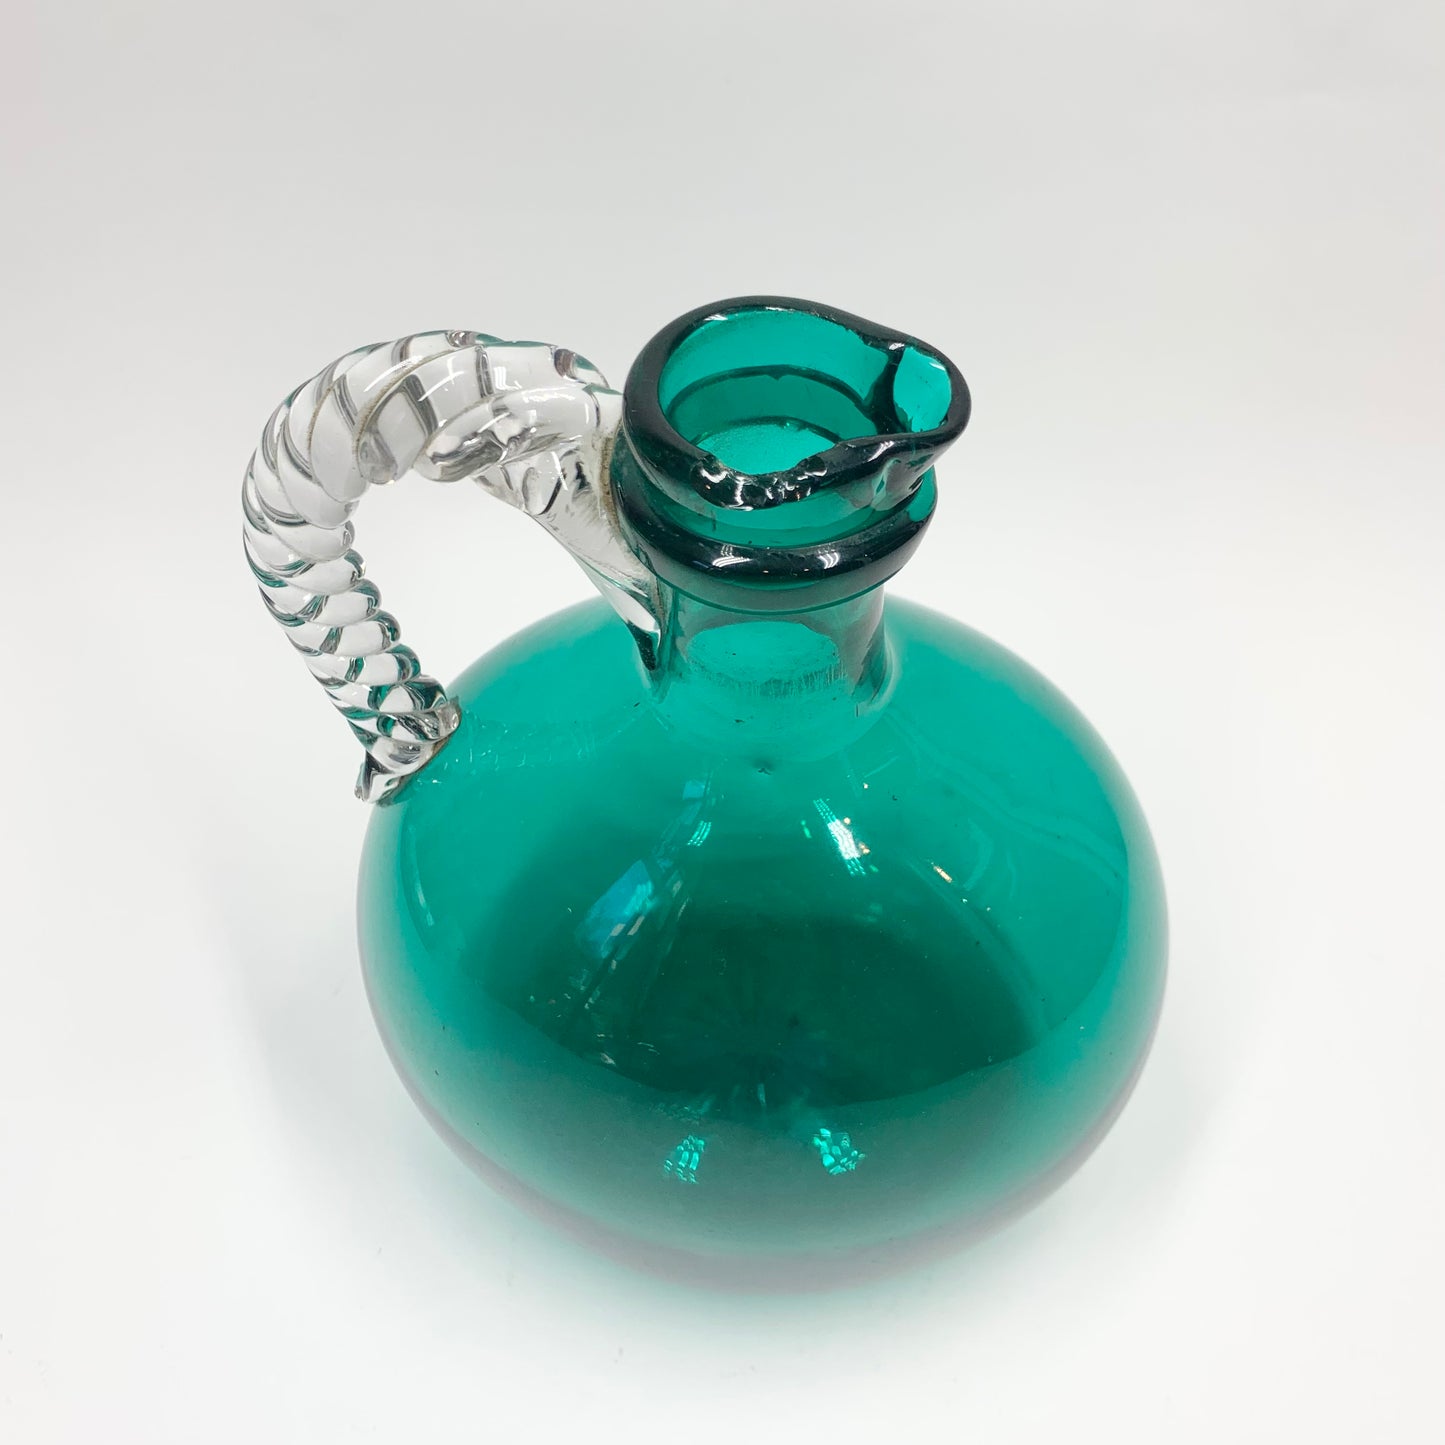 Extremely rare antique emerald green jug with twist clear glass handle